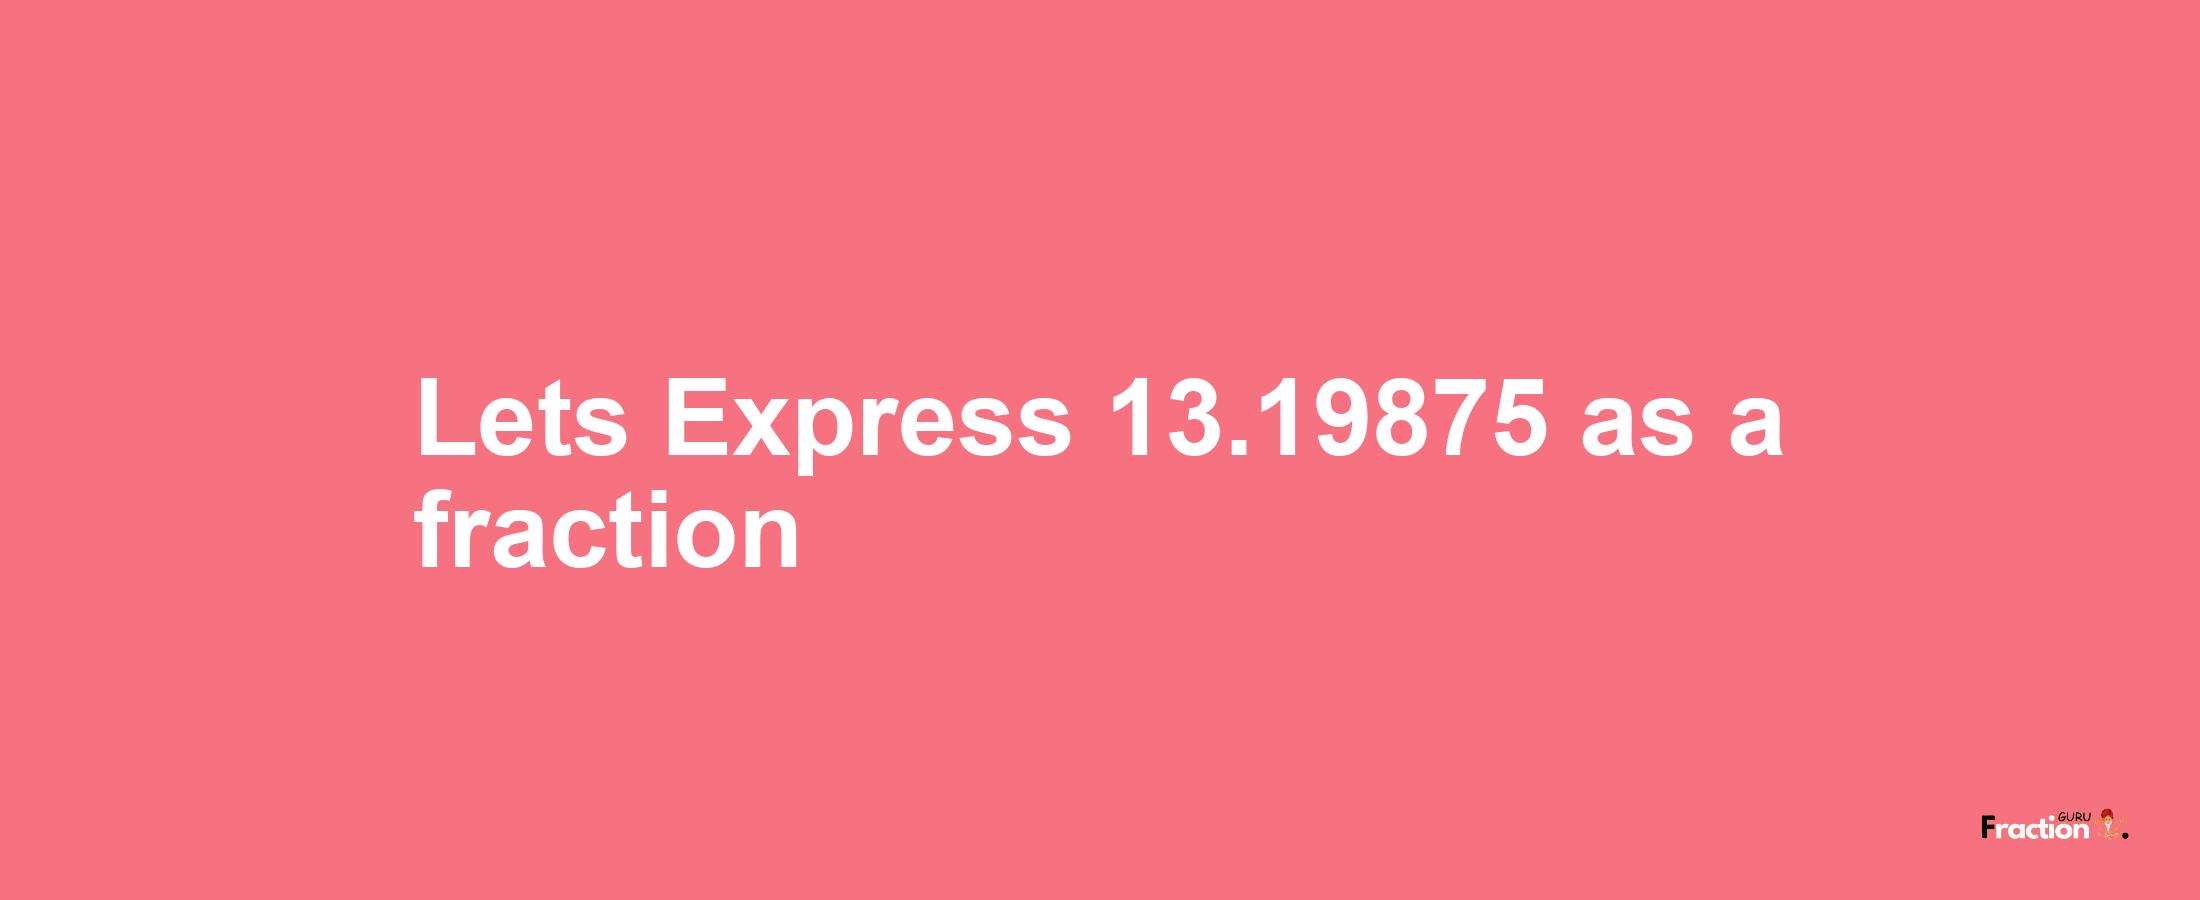 Lets Express 13.19875 as afraction